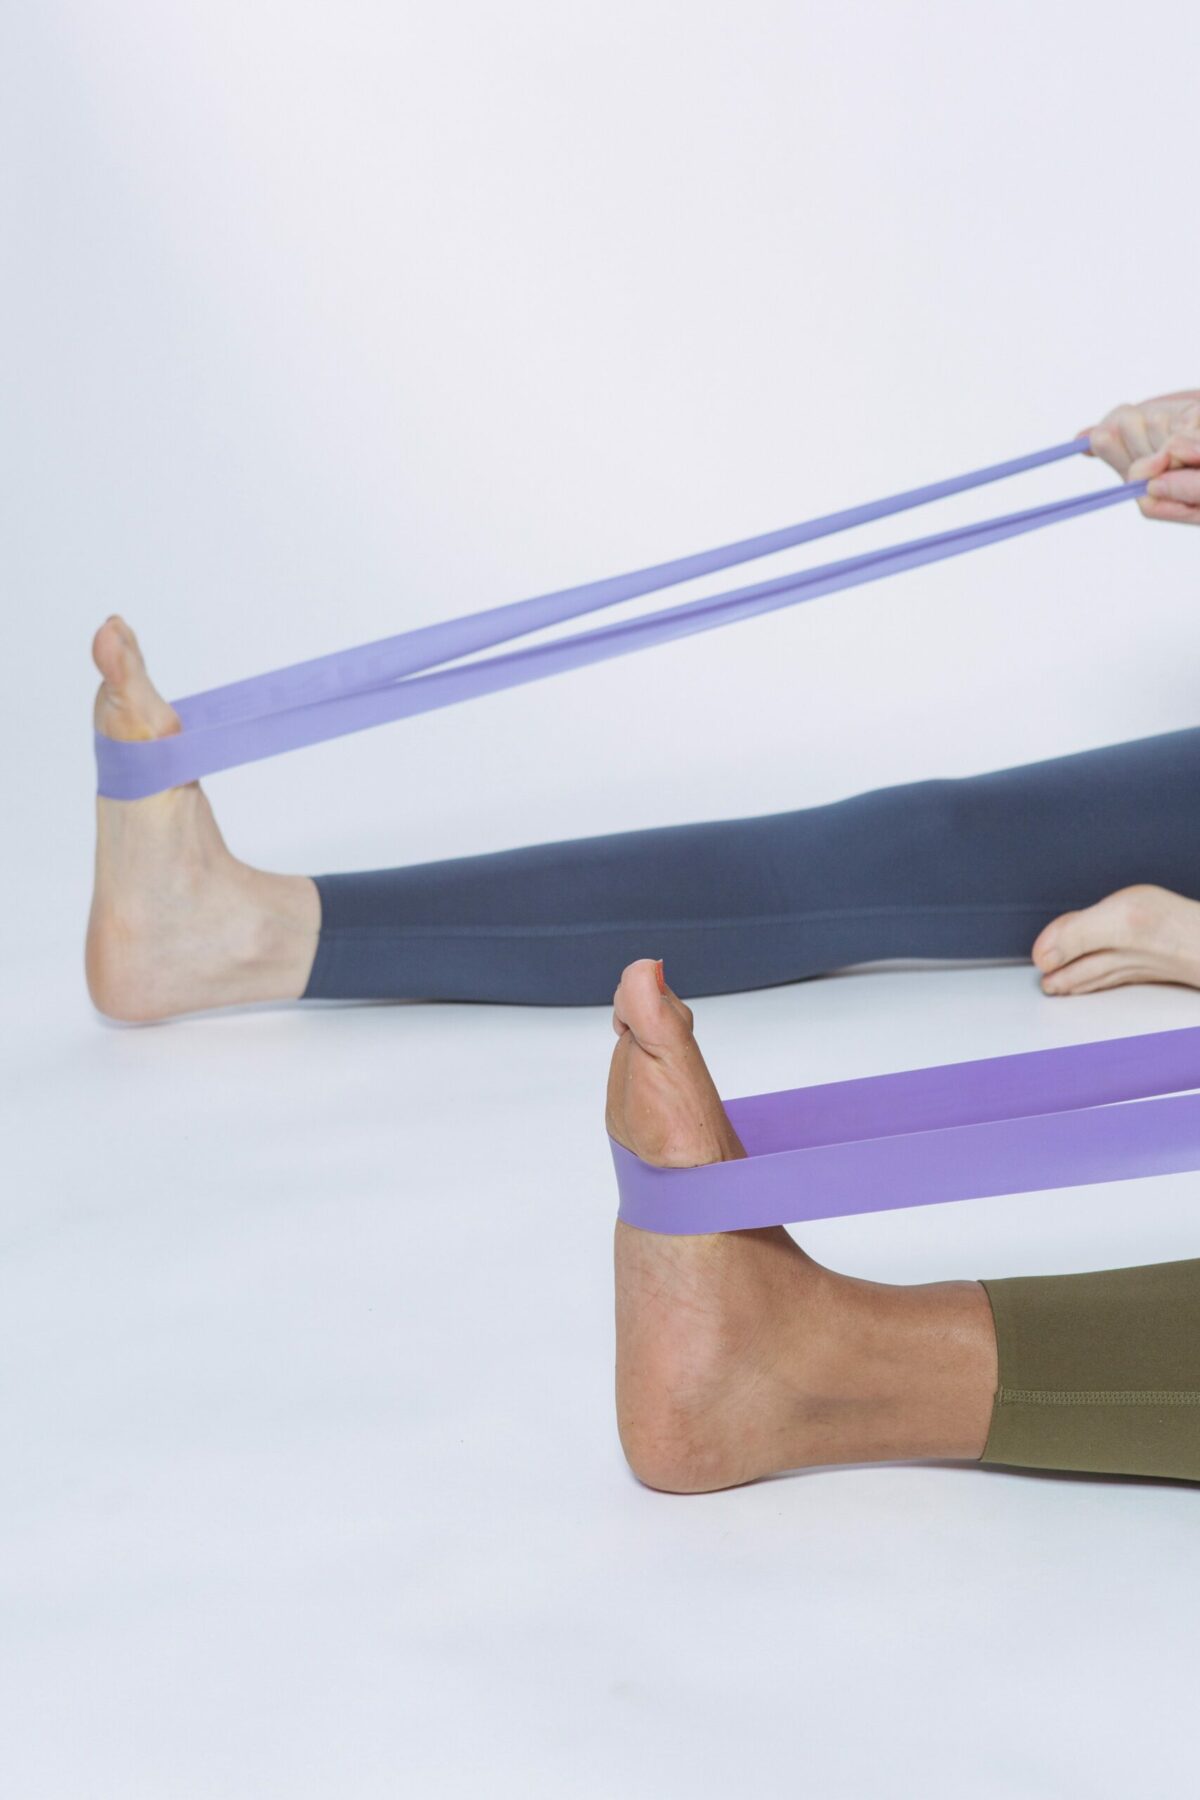 Two people using exercise bands.